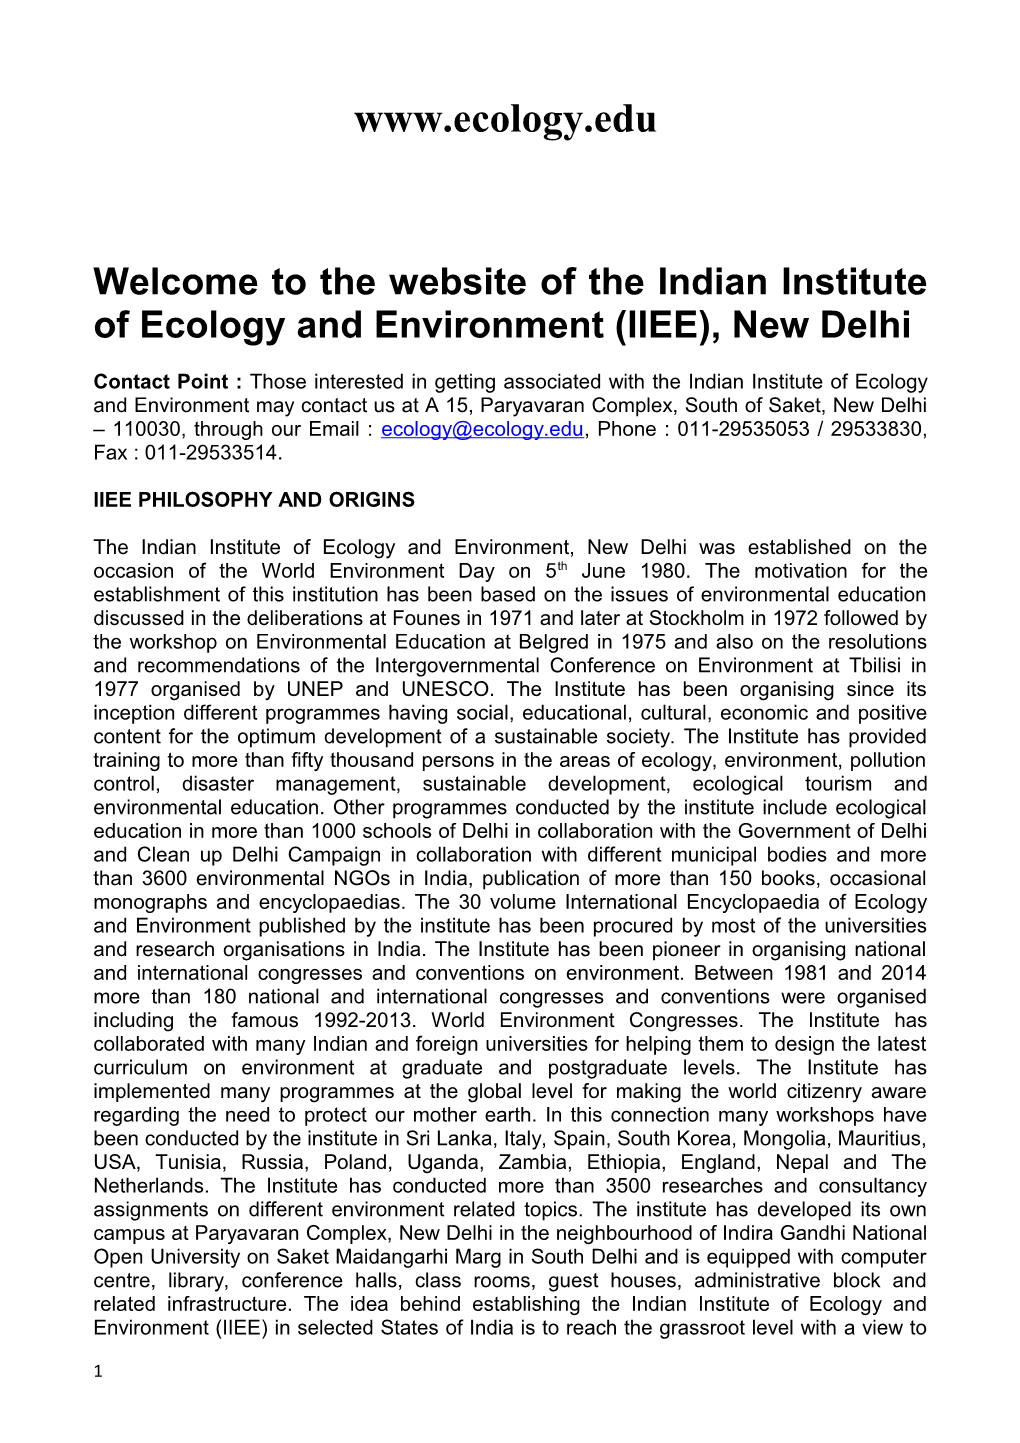 Welcome to the Website of the Indian Institute of Ecology and Environment (IIEE), New Delhi